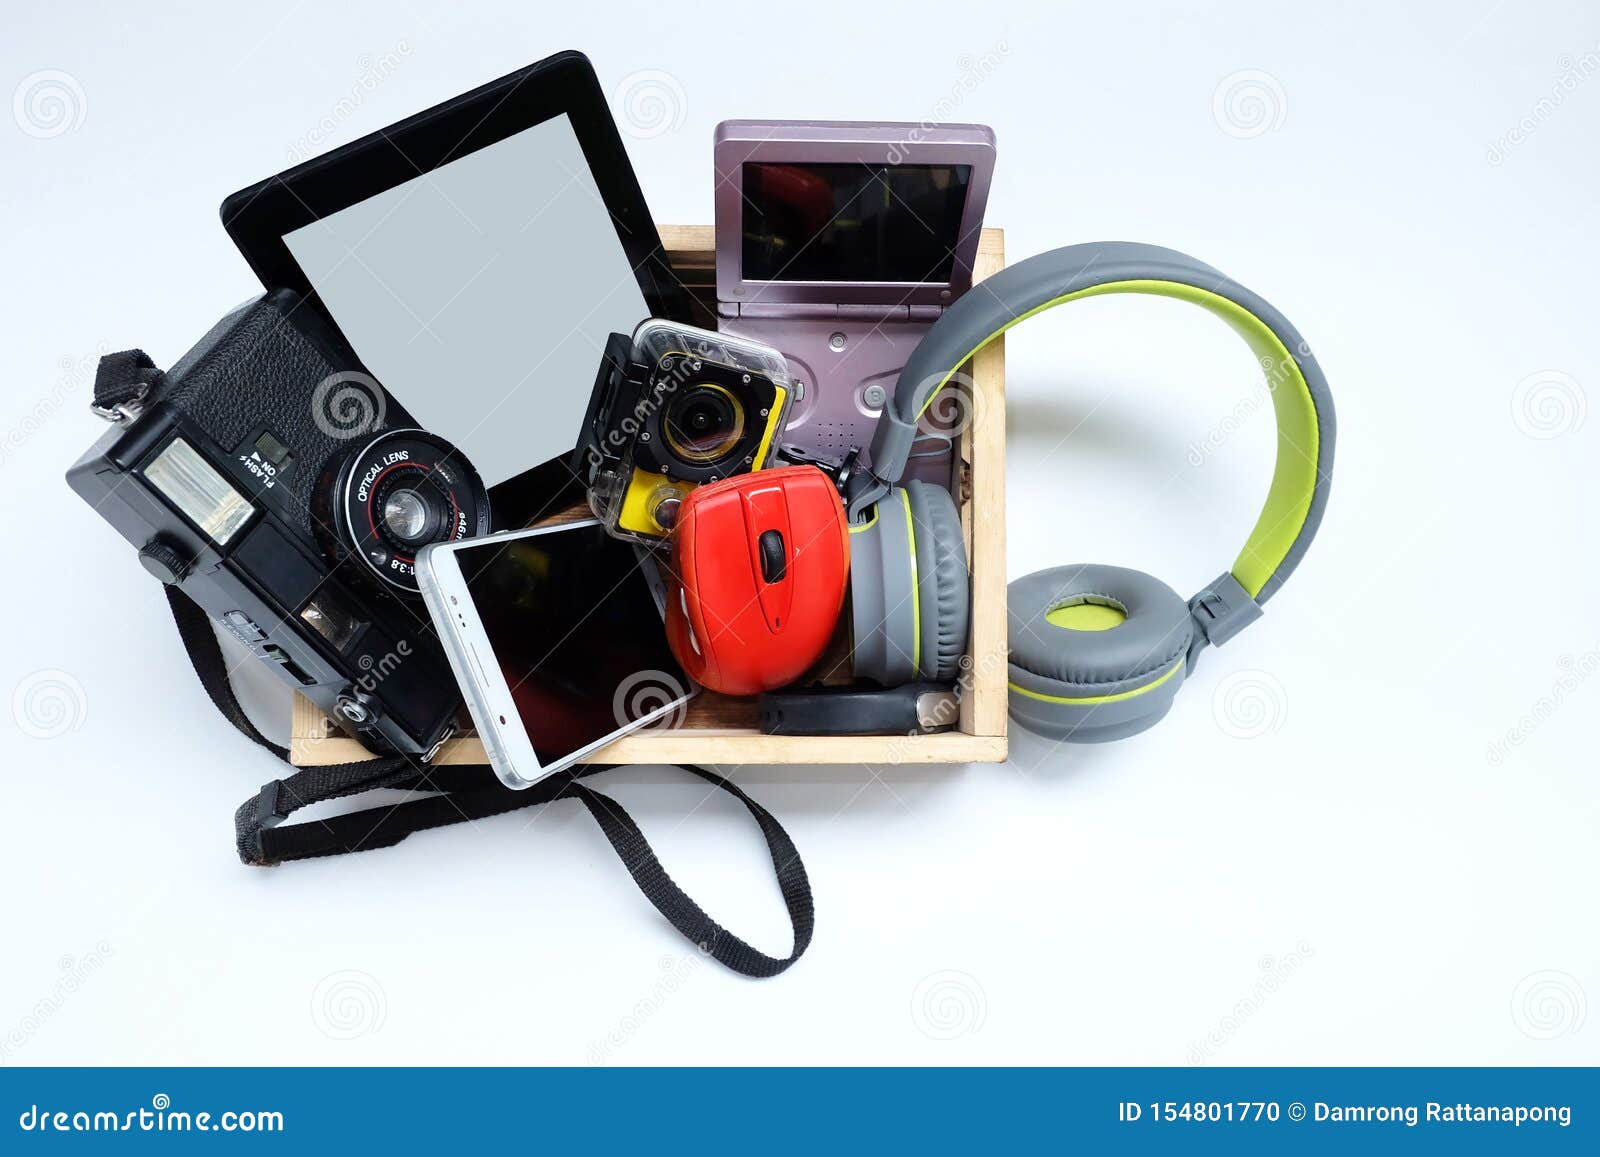 many used modern electronic gadgets for daily use in wooden cases on white background